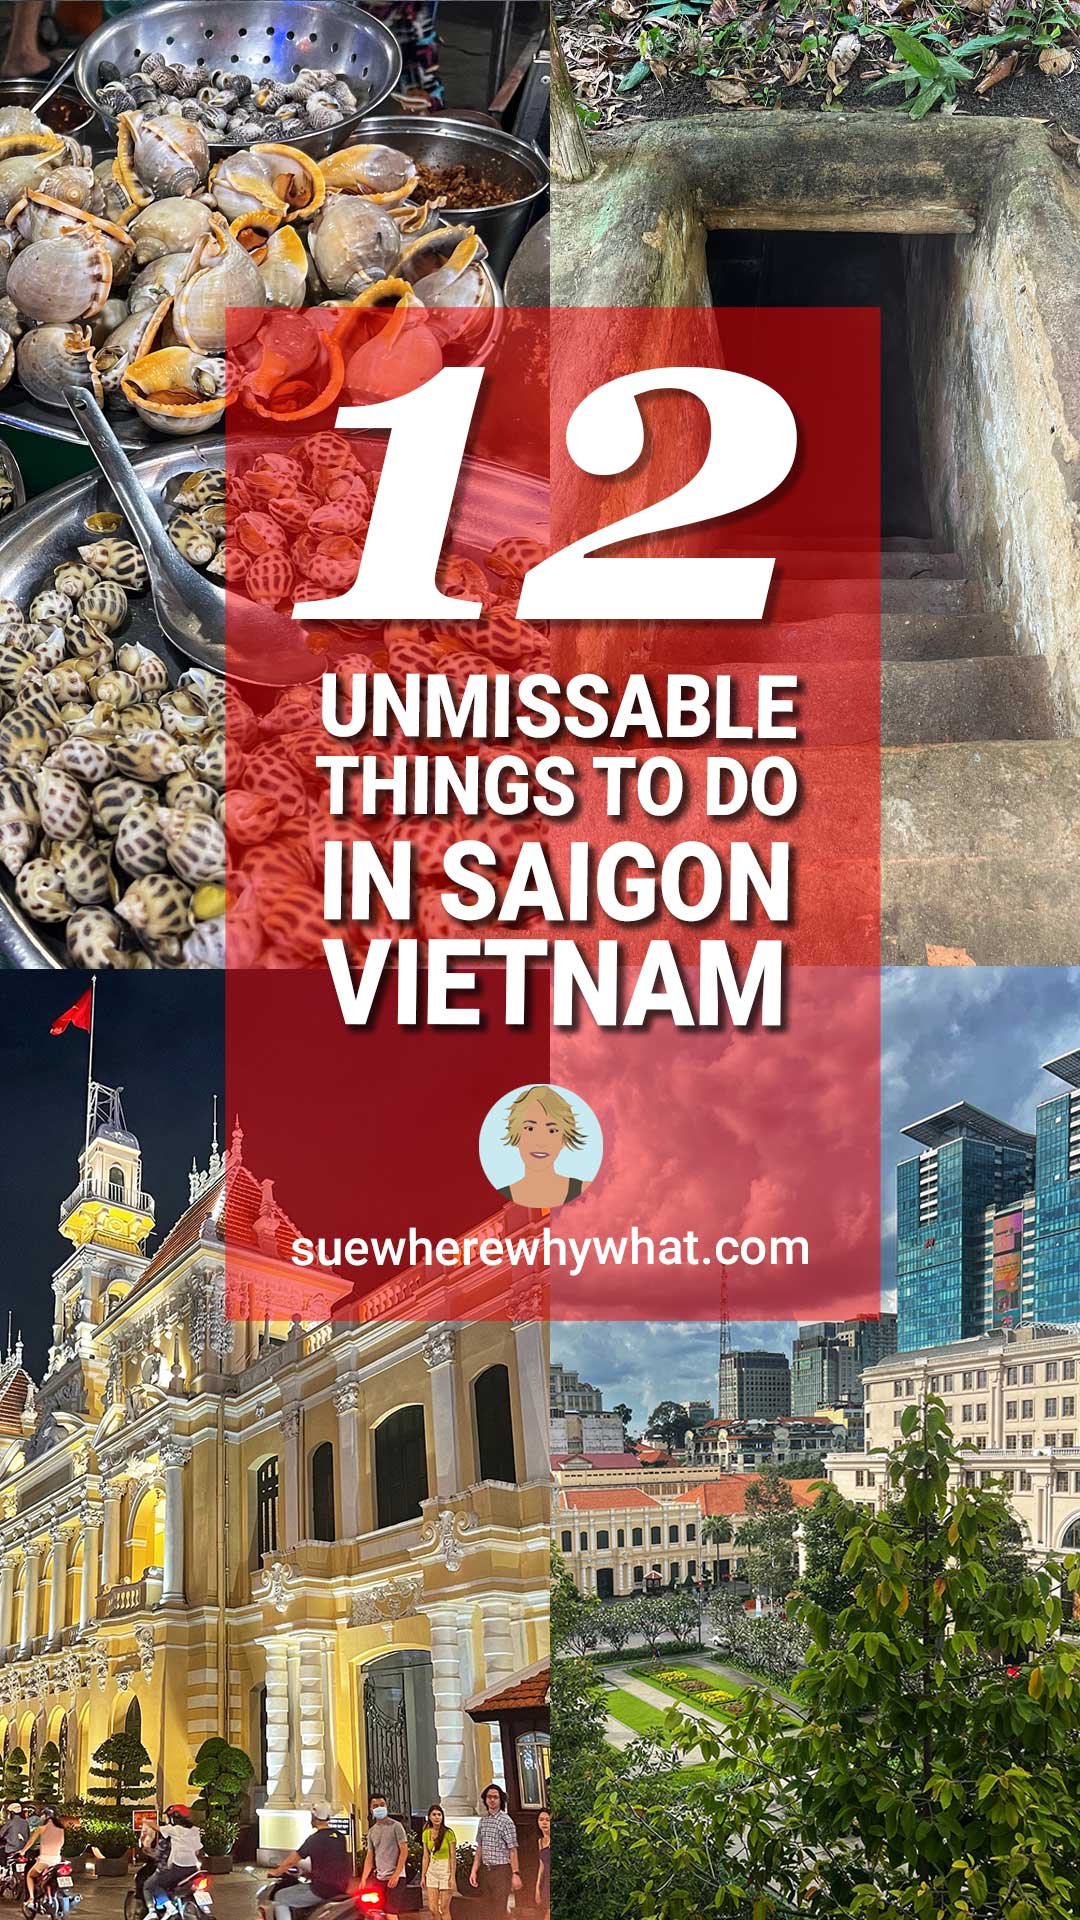 12 Unmissable Things to Do in Saigon (Ho Chi Minh City), Vietnam